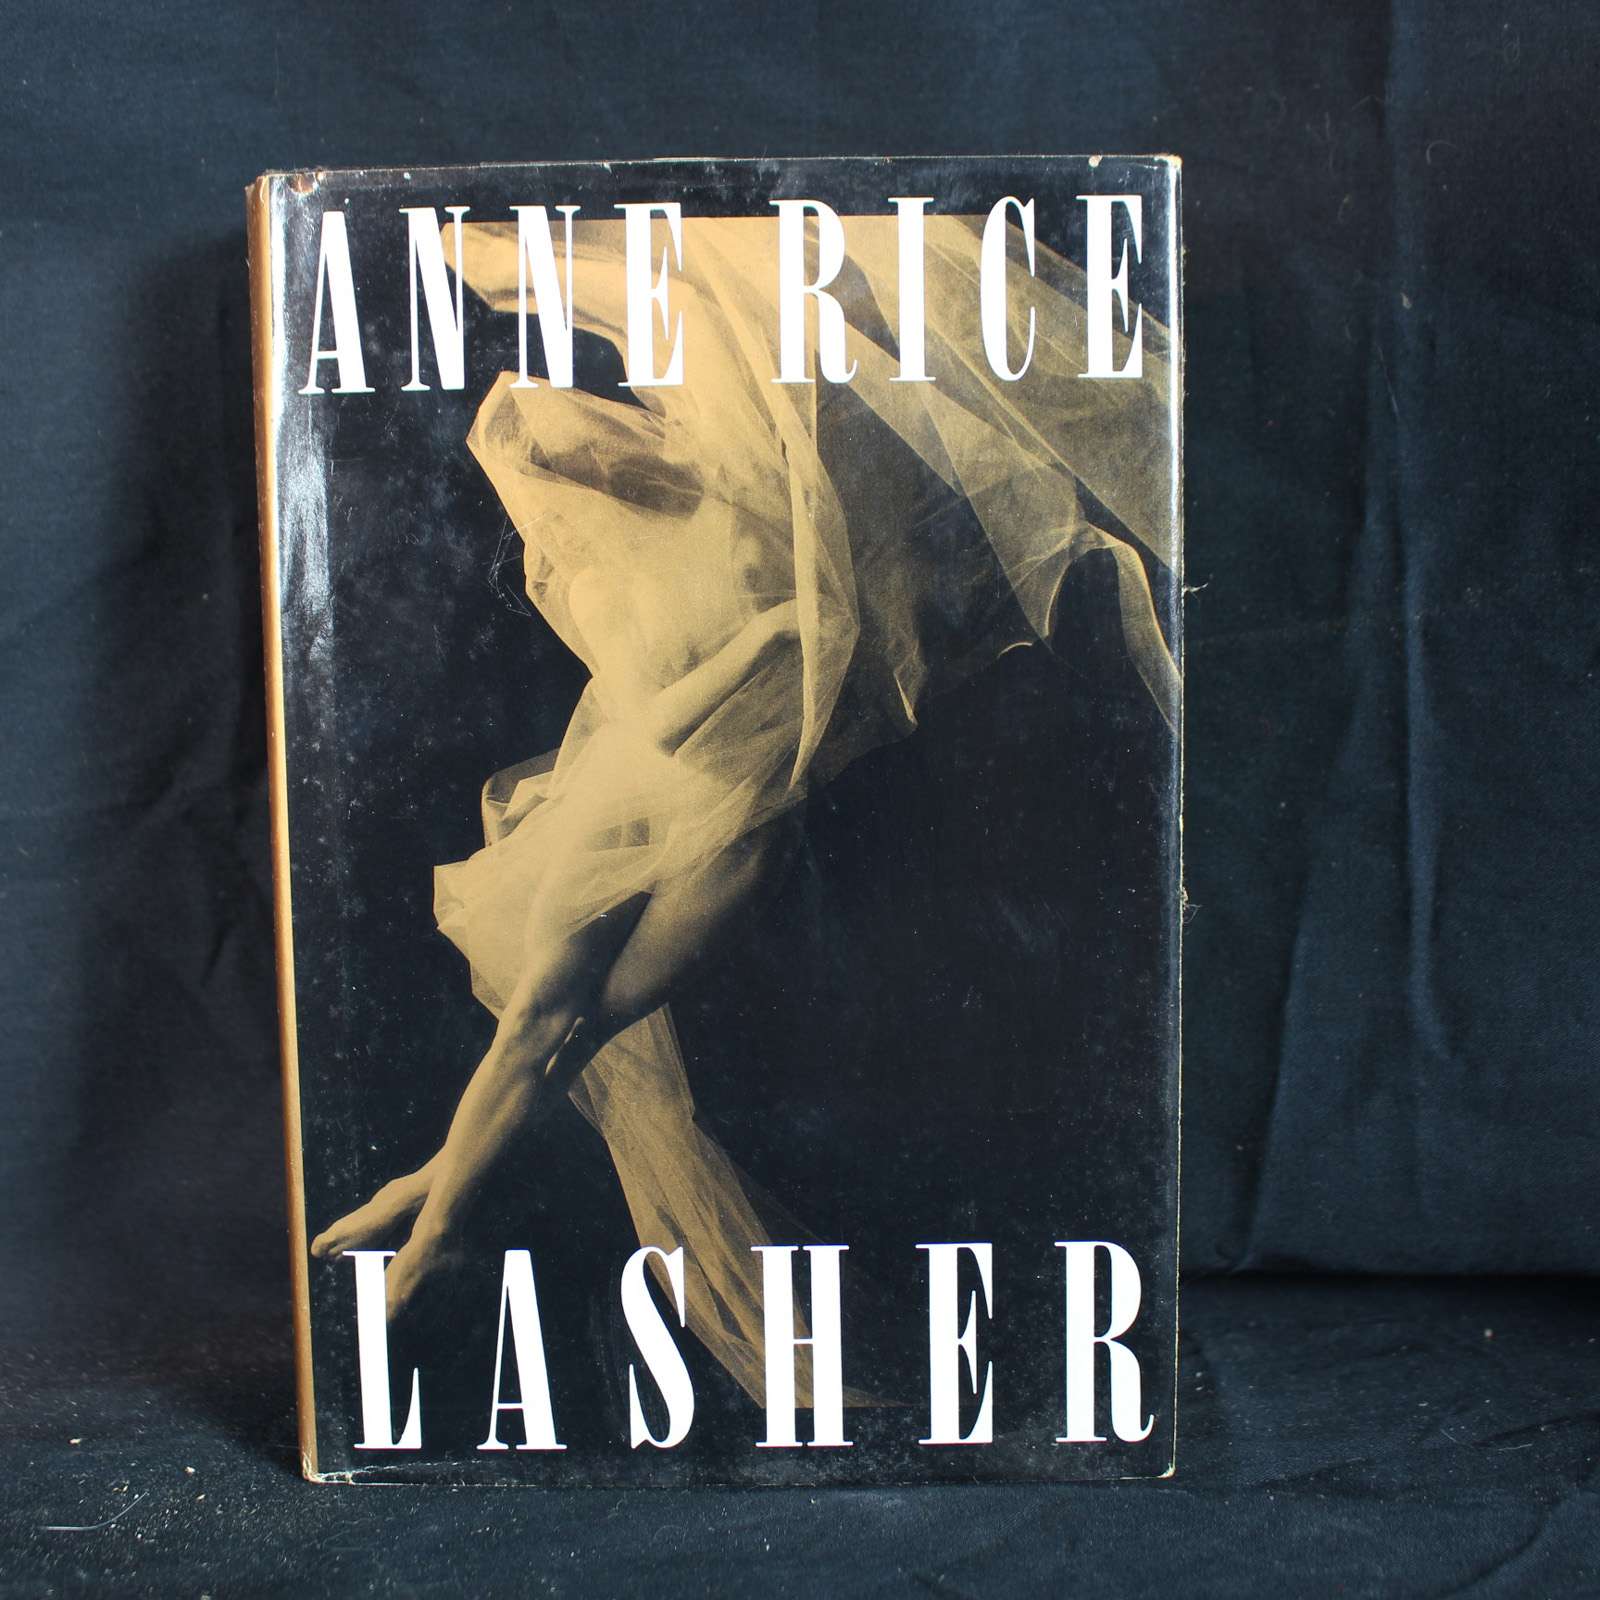 Hardcover First Edition Lasher by Anne Rice, 1993